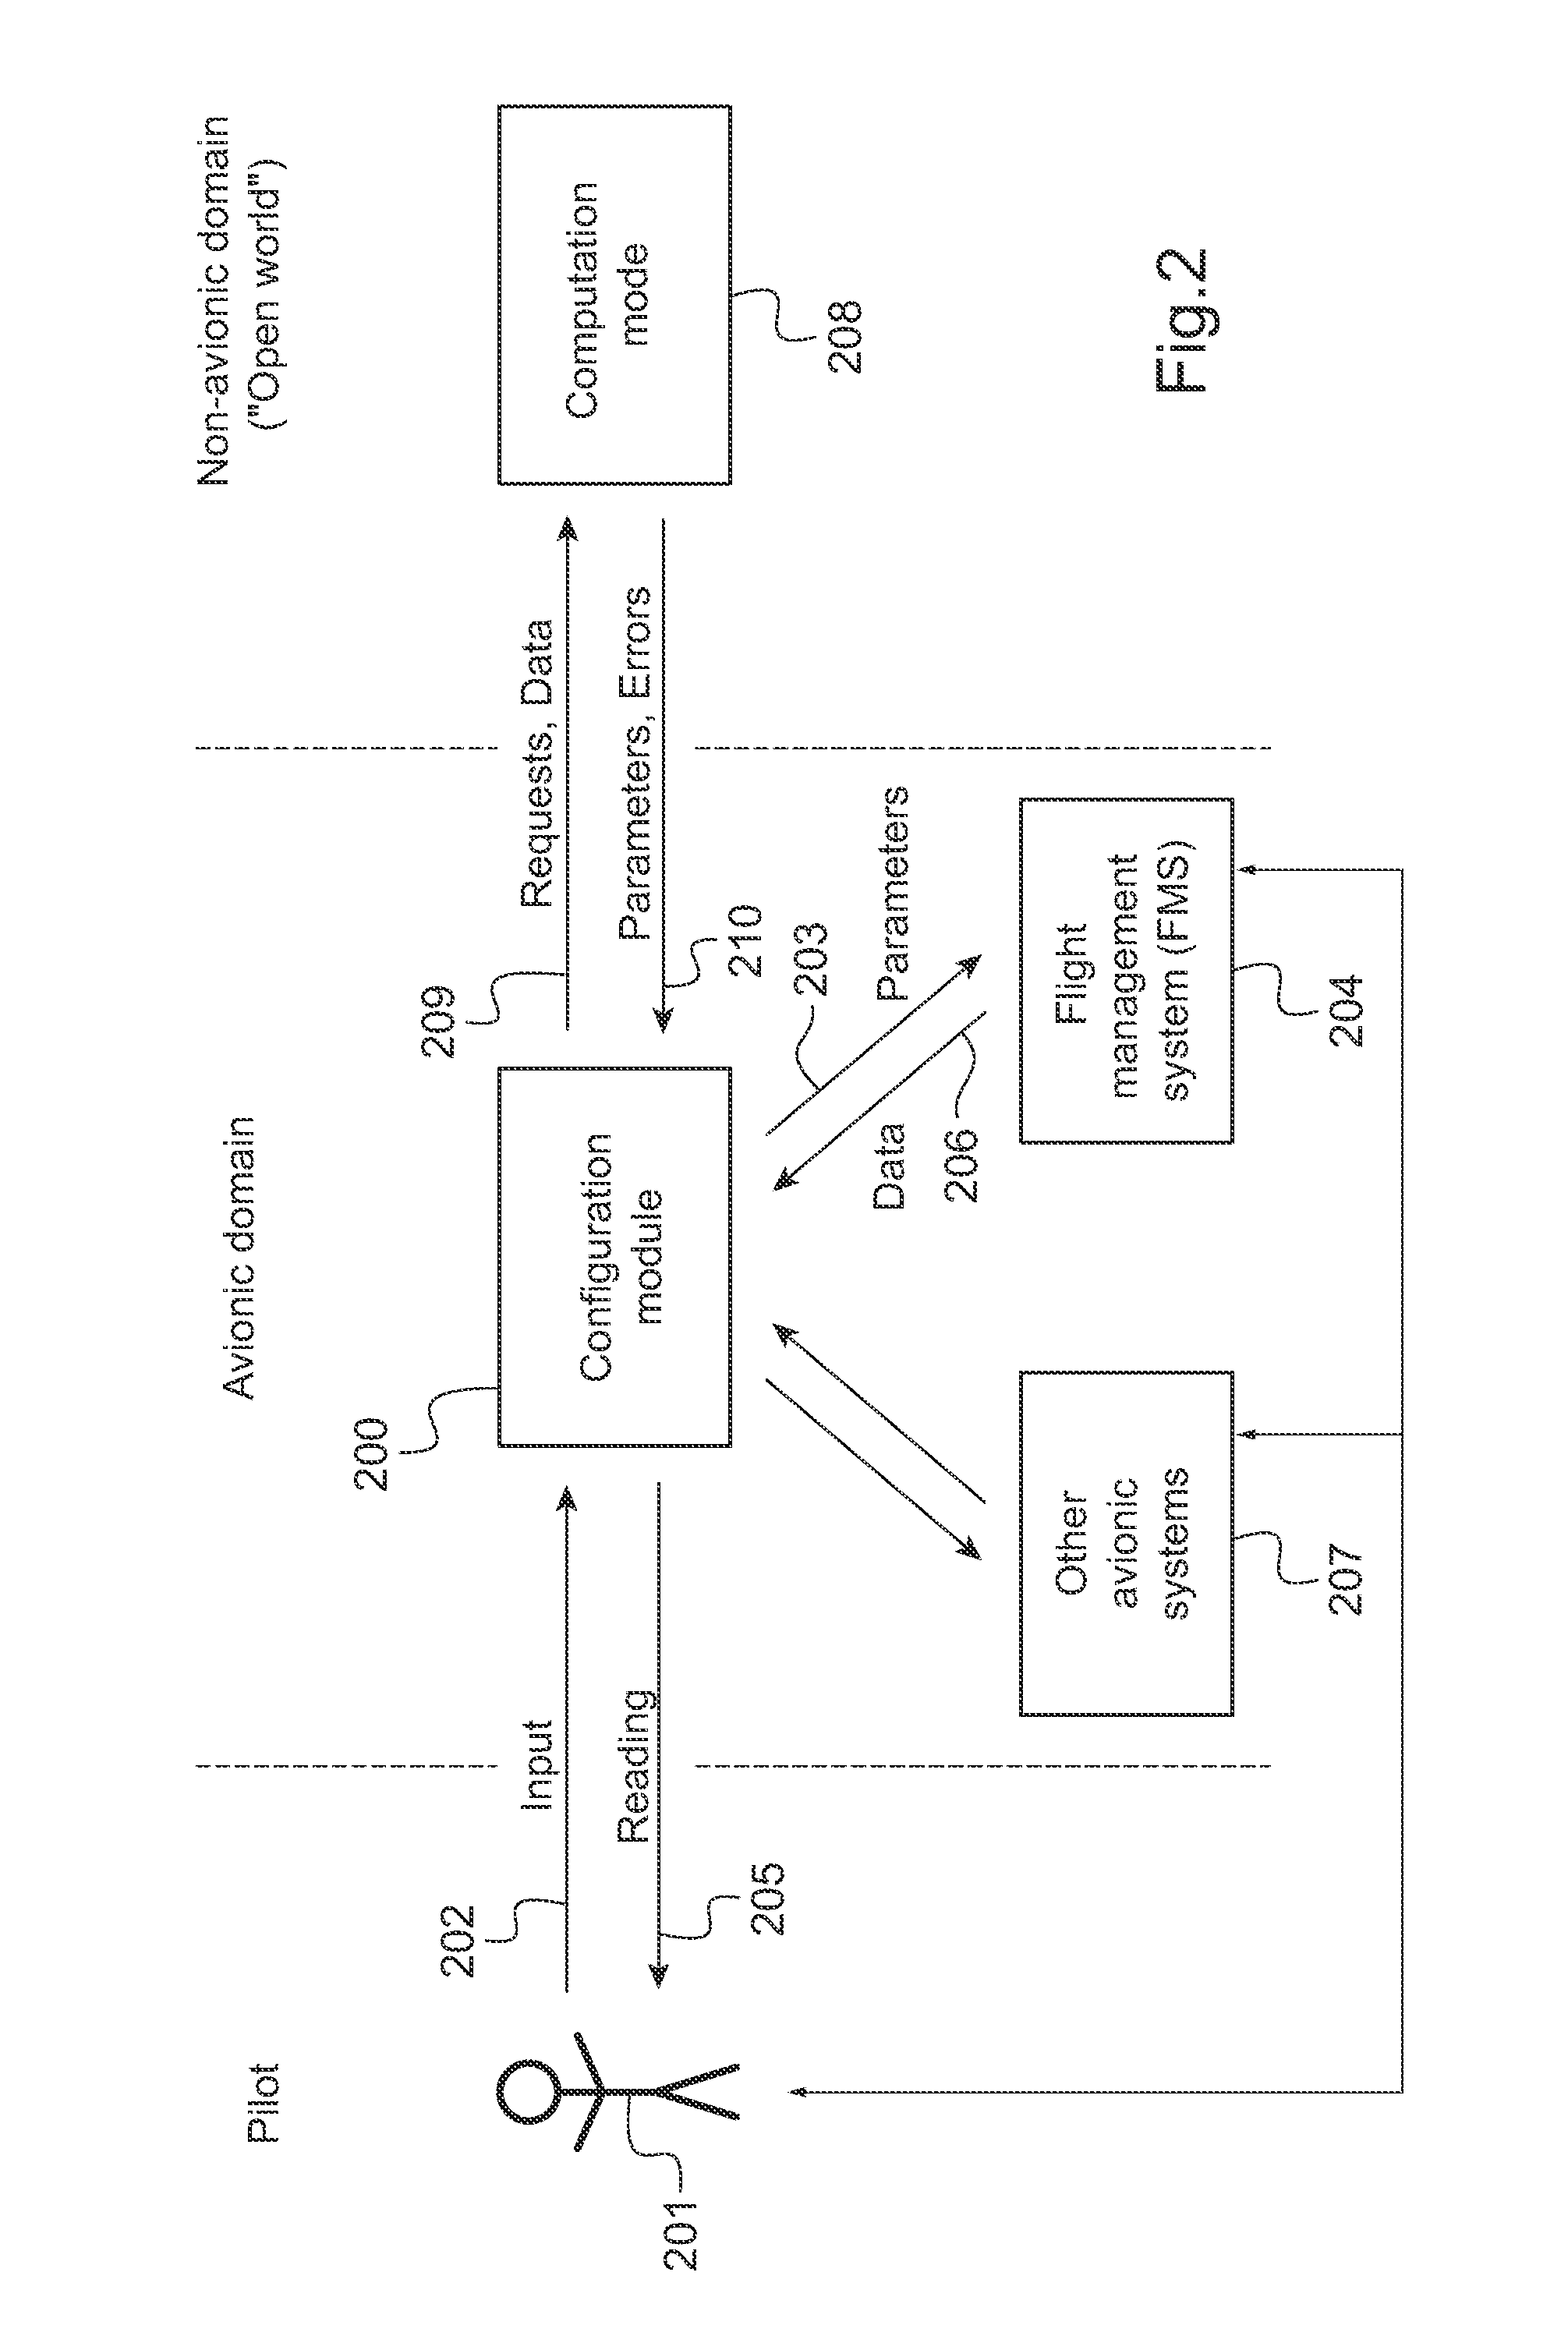 Hybrid architecture for an aircraft system